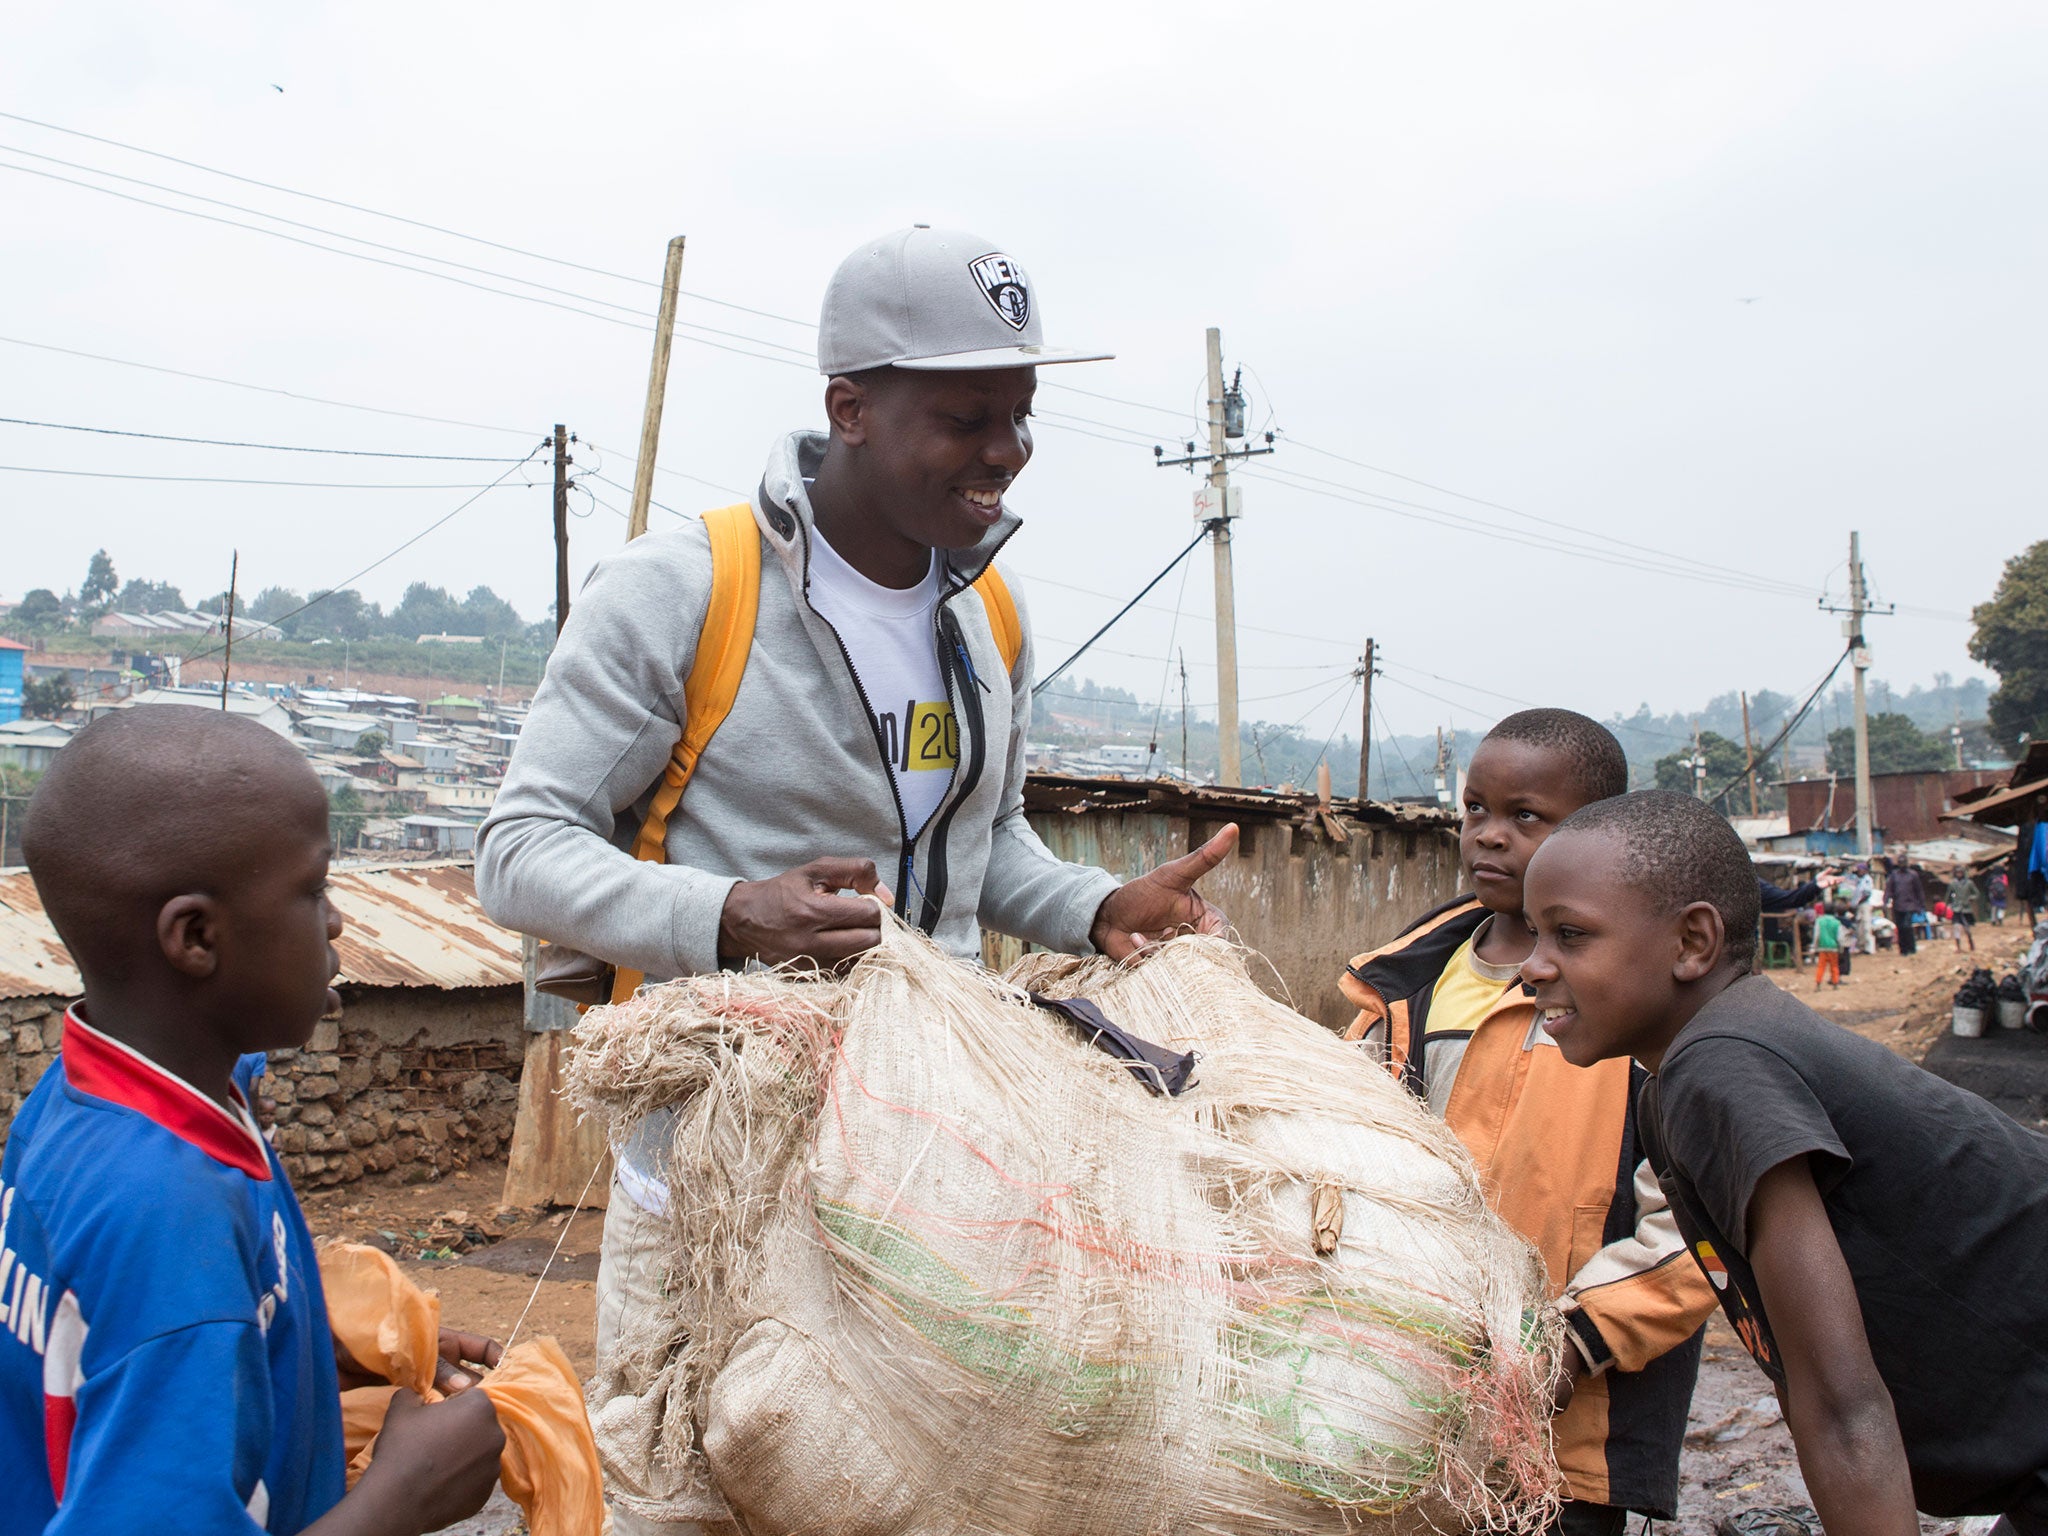 Jamal with children in Kibera, where unemployment is at 50 per cent and many residents live in extreme poverty